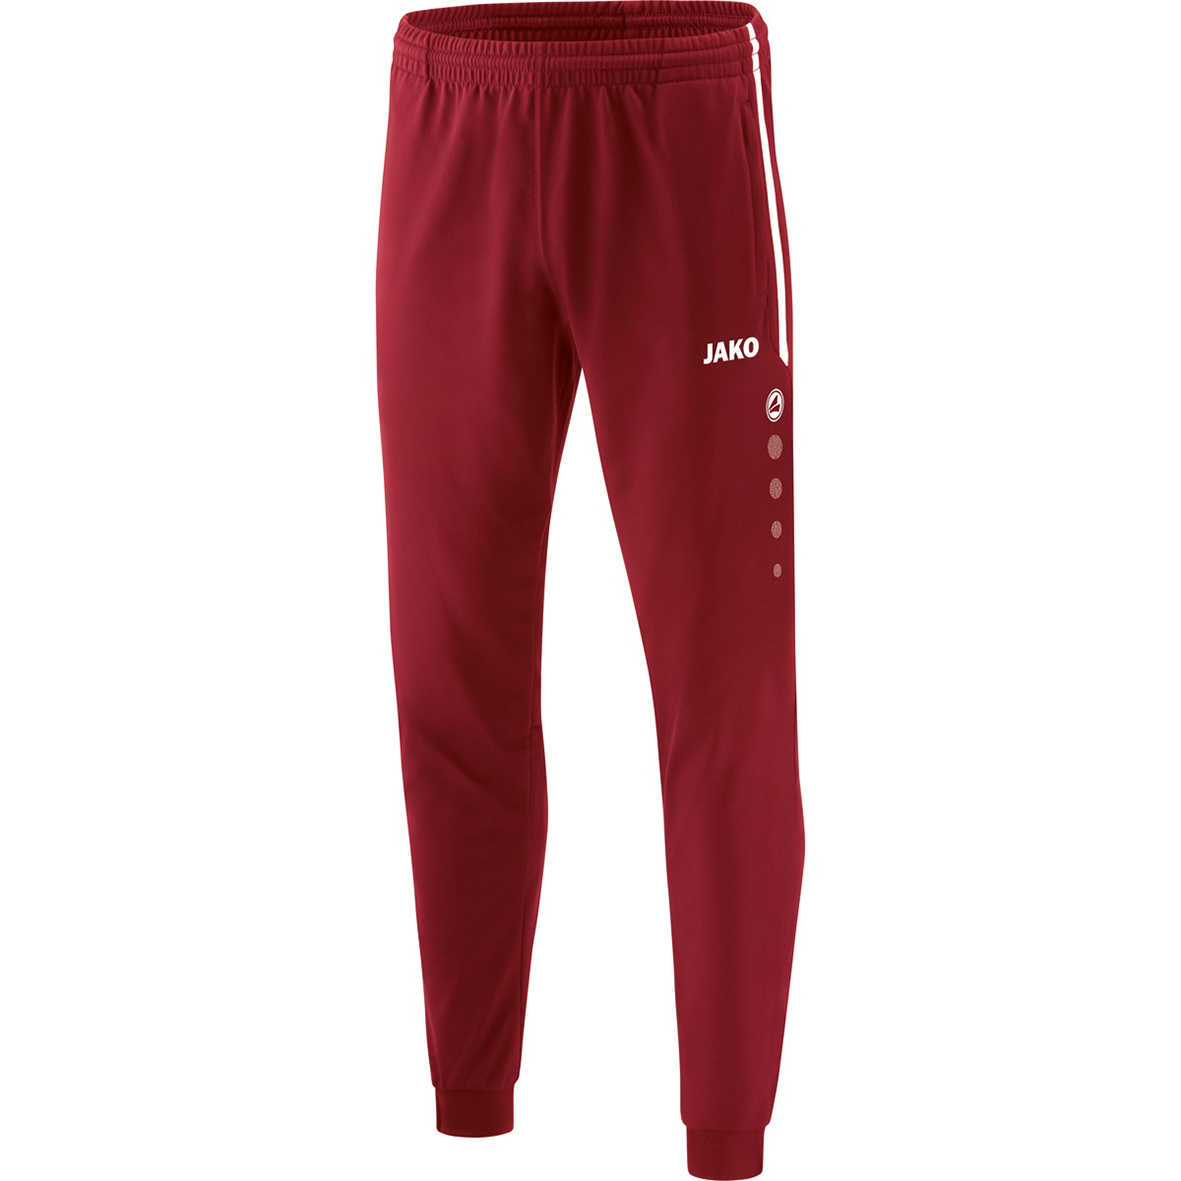 TROUSERS JAKO COMPETITION 2.0, WINE RED MEN.